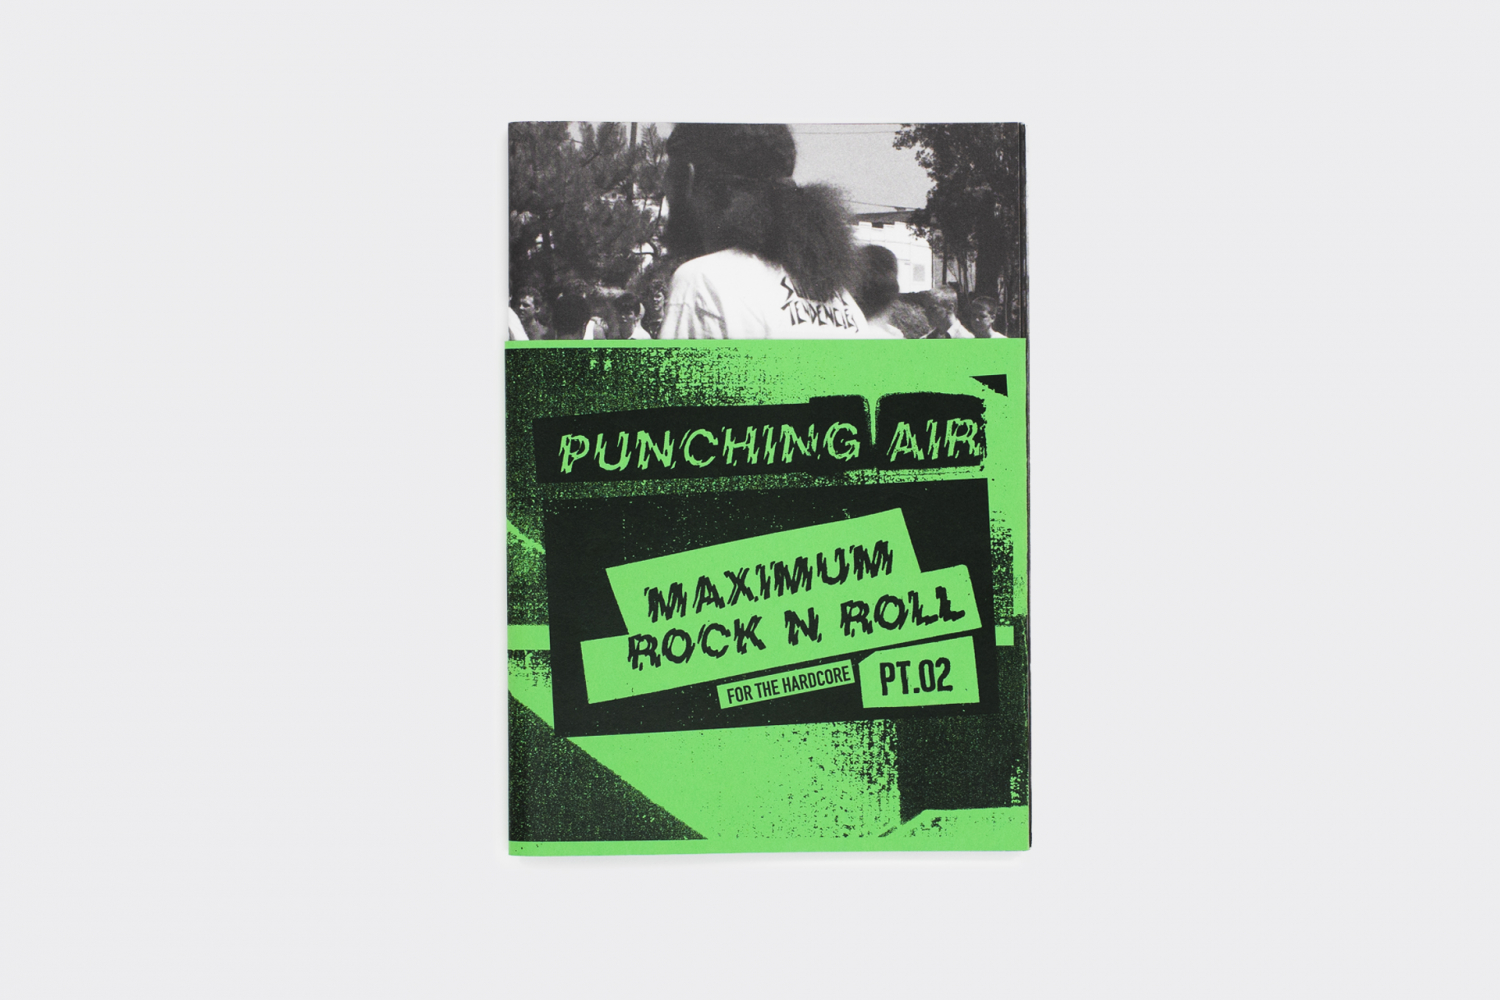 punching the air book review